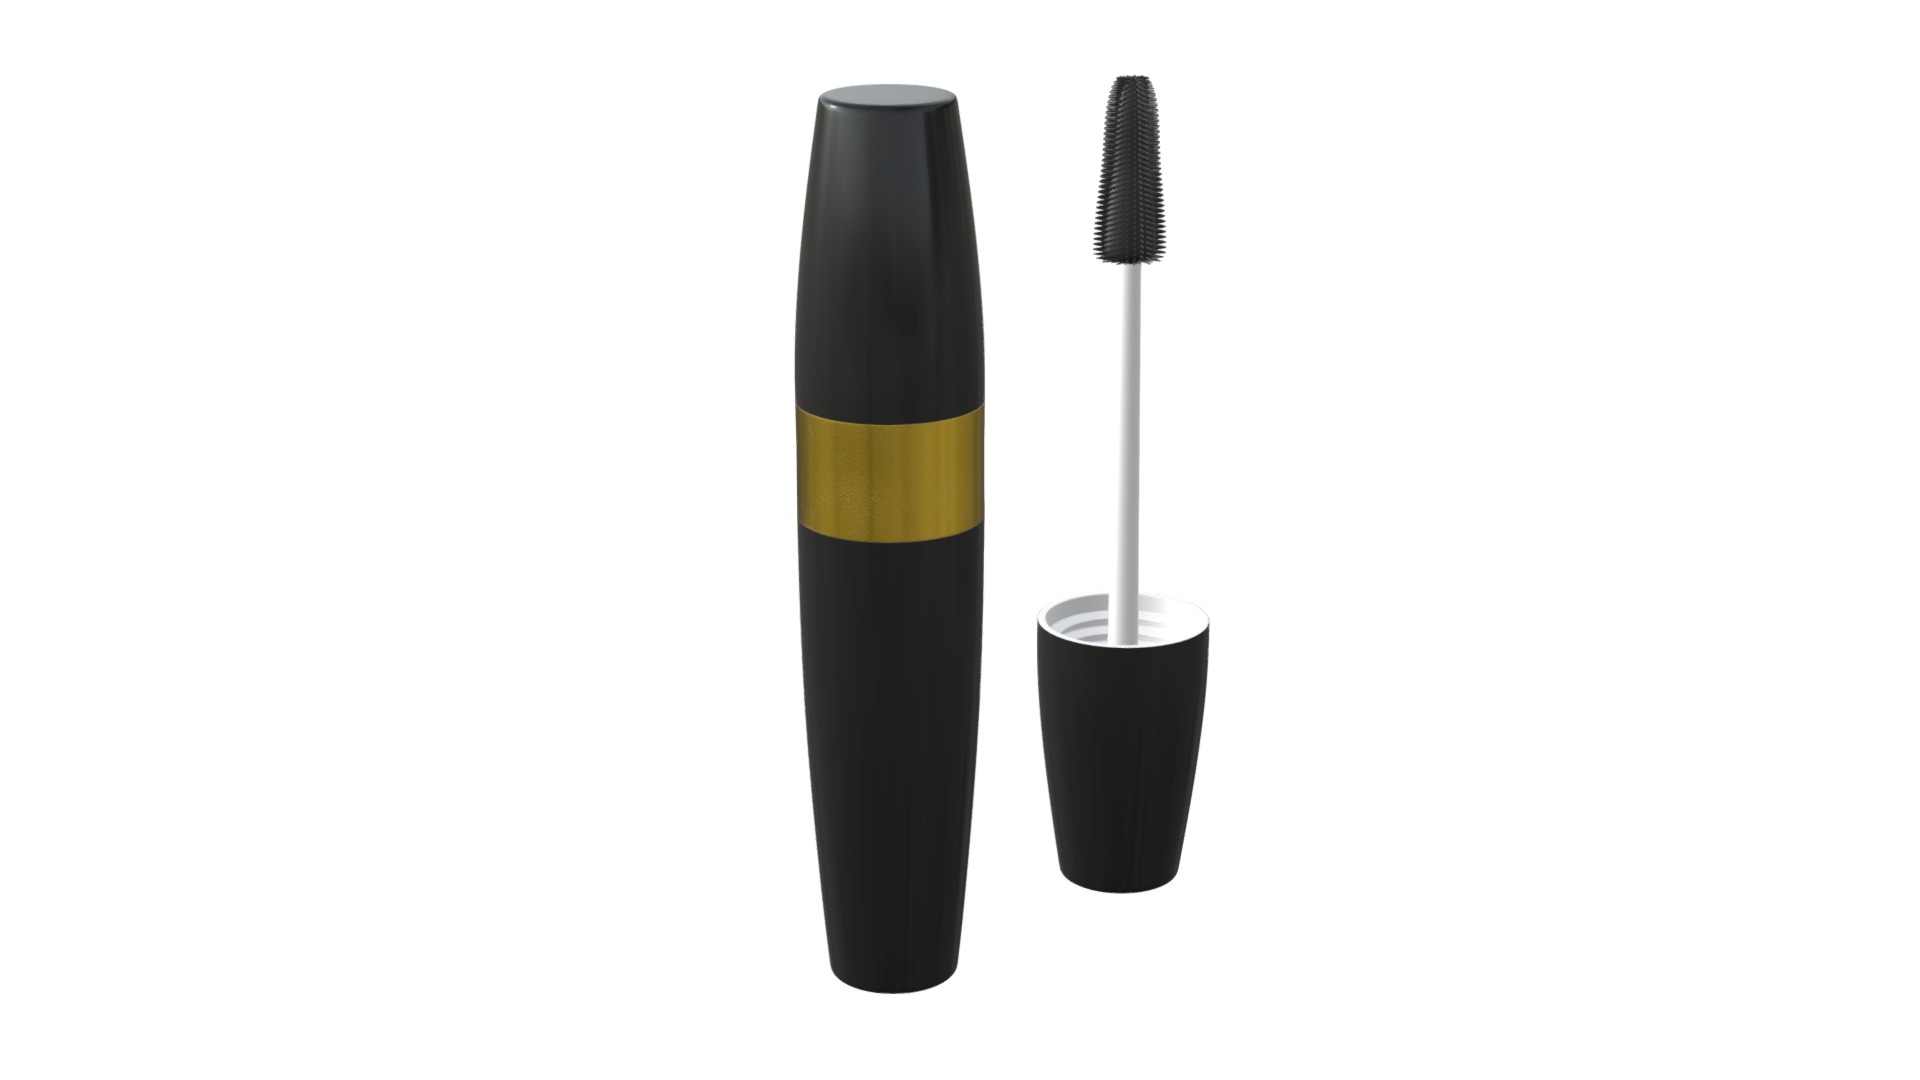 3D model Mascara gold - This is a 3D model of the Mascara gold. The 3D model is about a black and yellow tube.